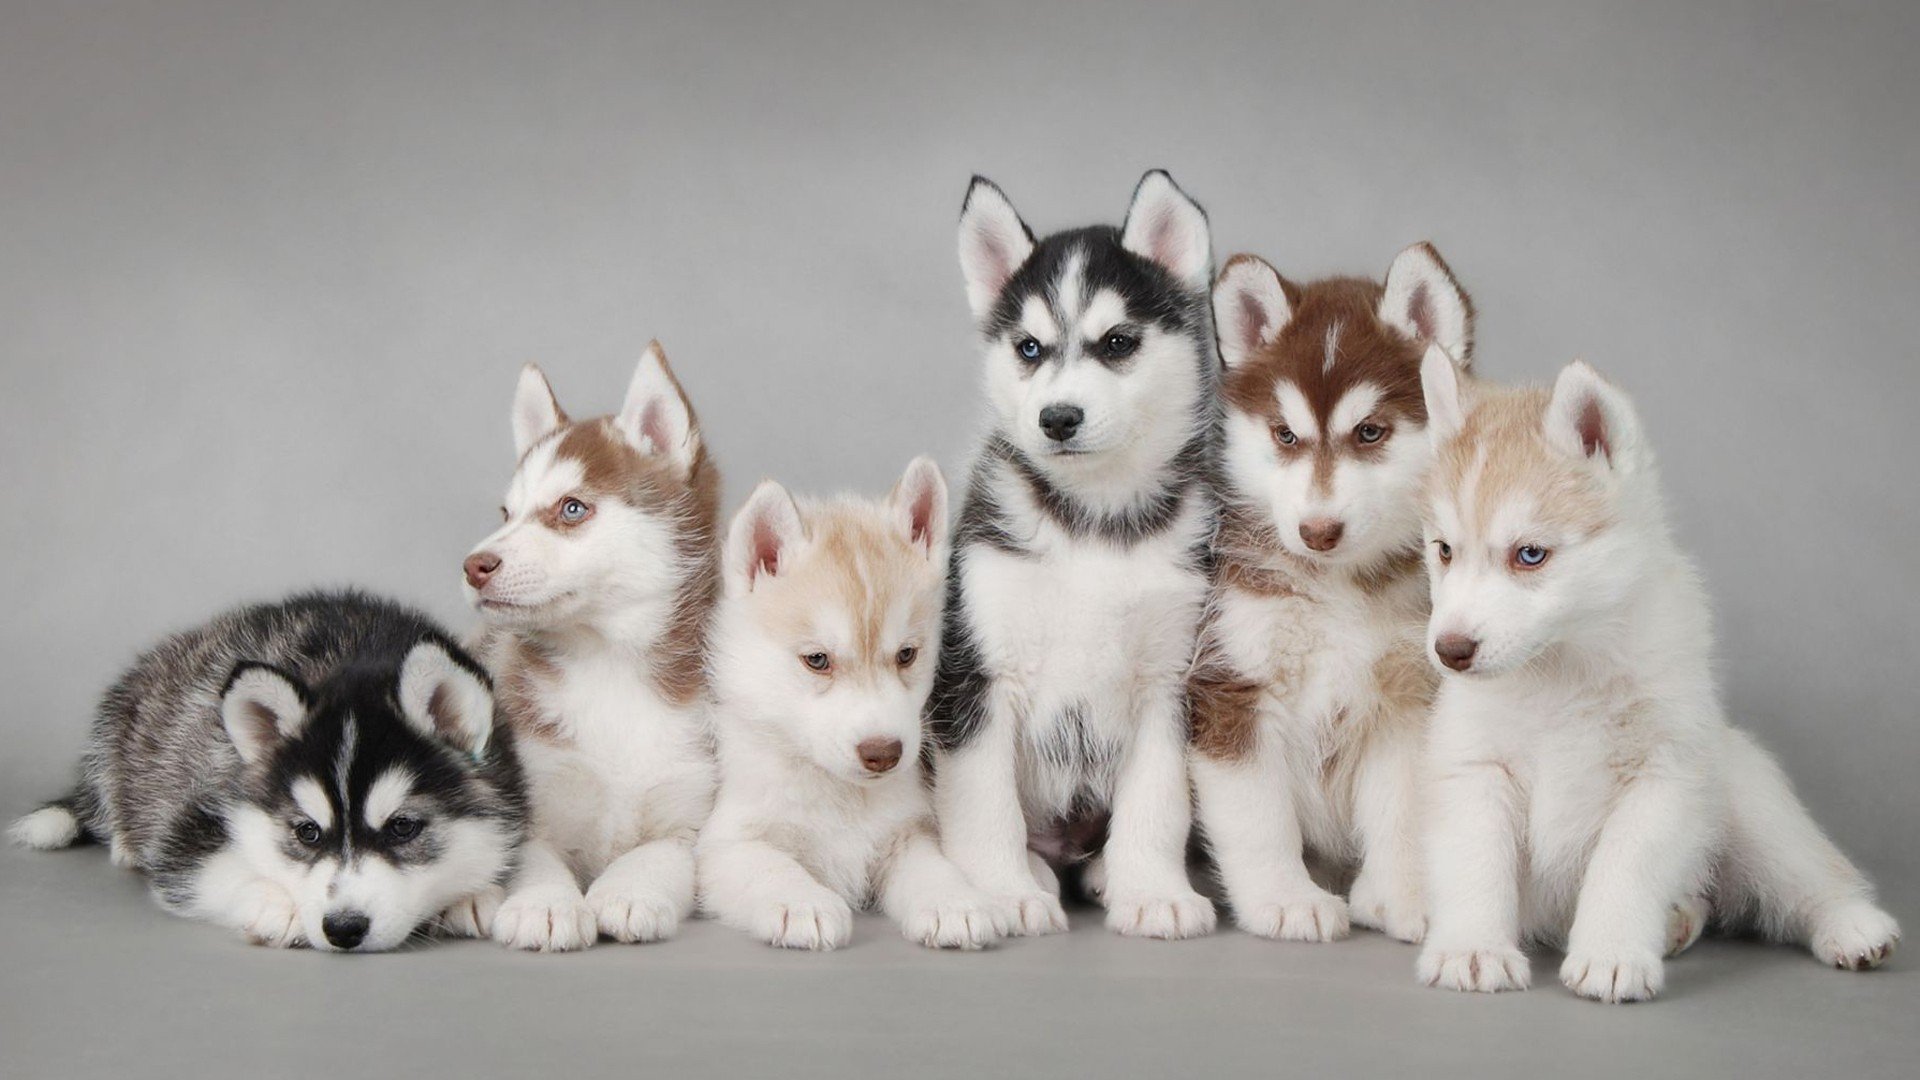 Siberian Husky puppies of different colors